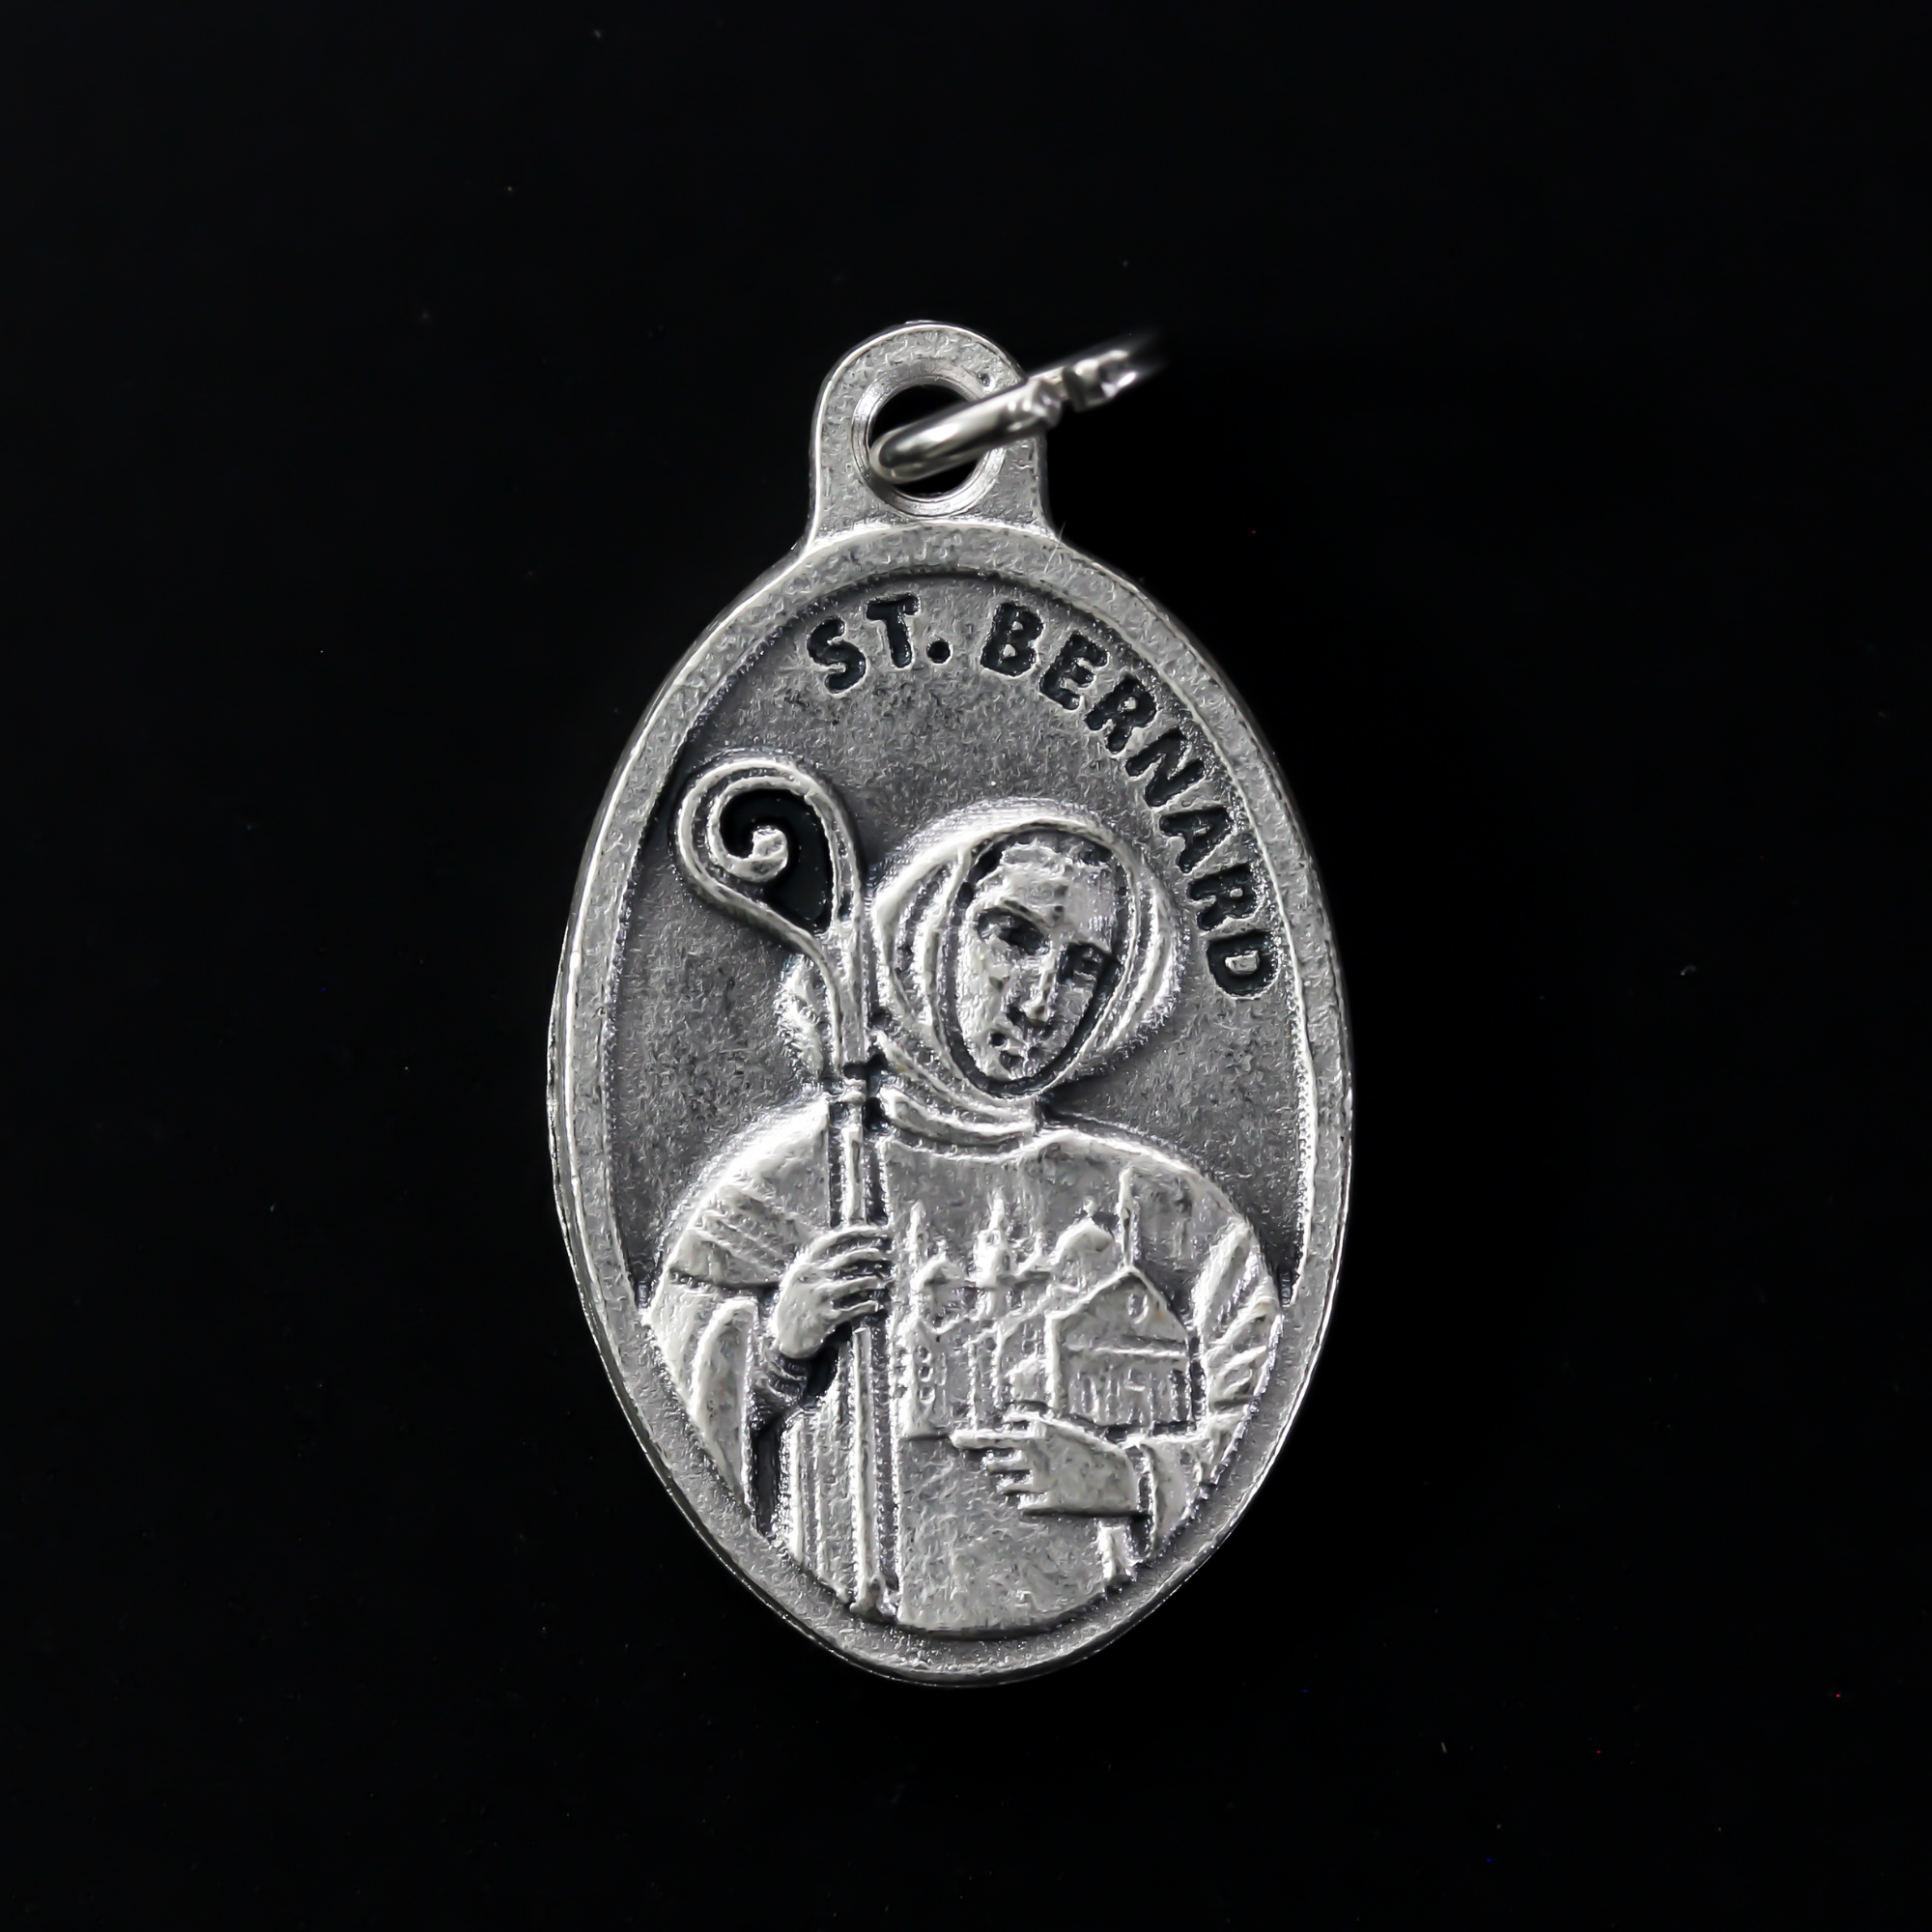 Saint Bernard of Clairvaux medal that depicts the saint on the front holding a church and crozier. Marked "Pray For Us" on the back